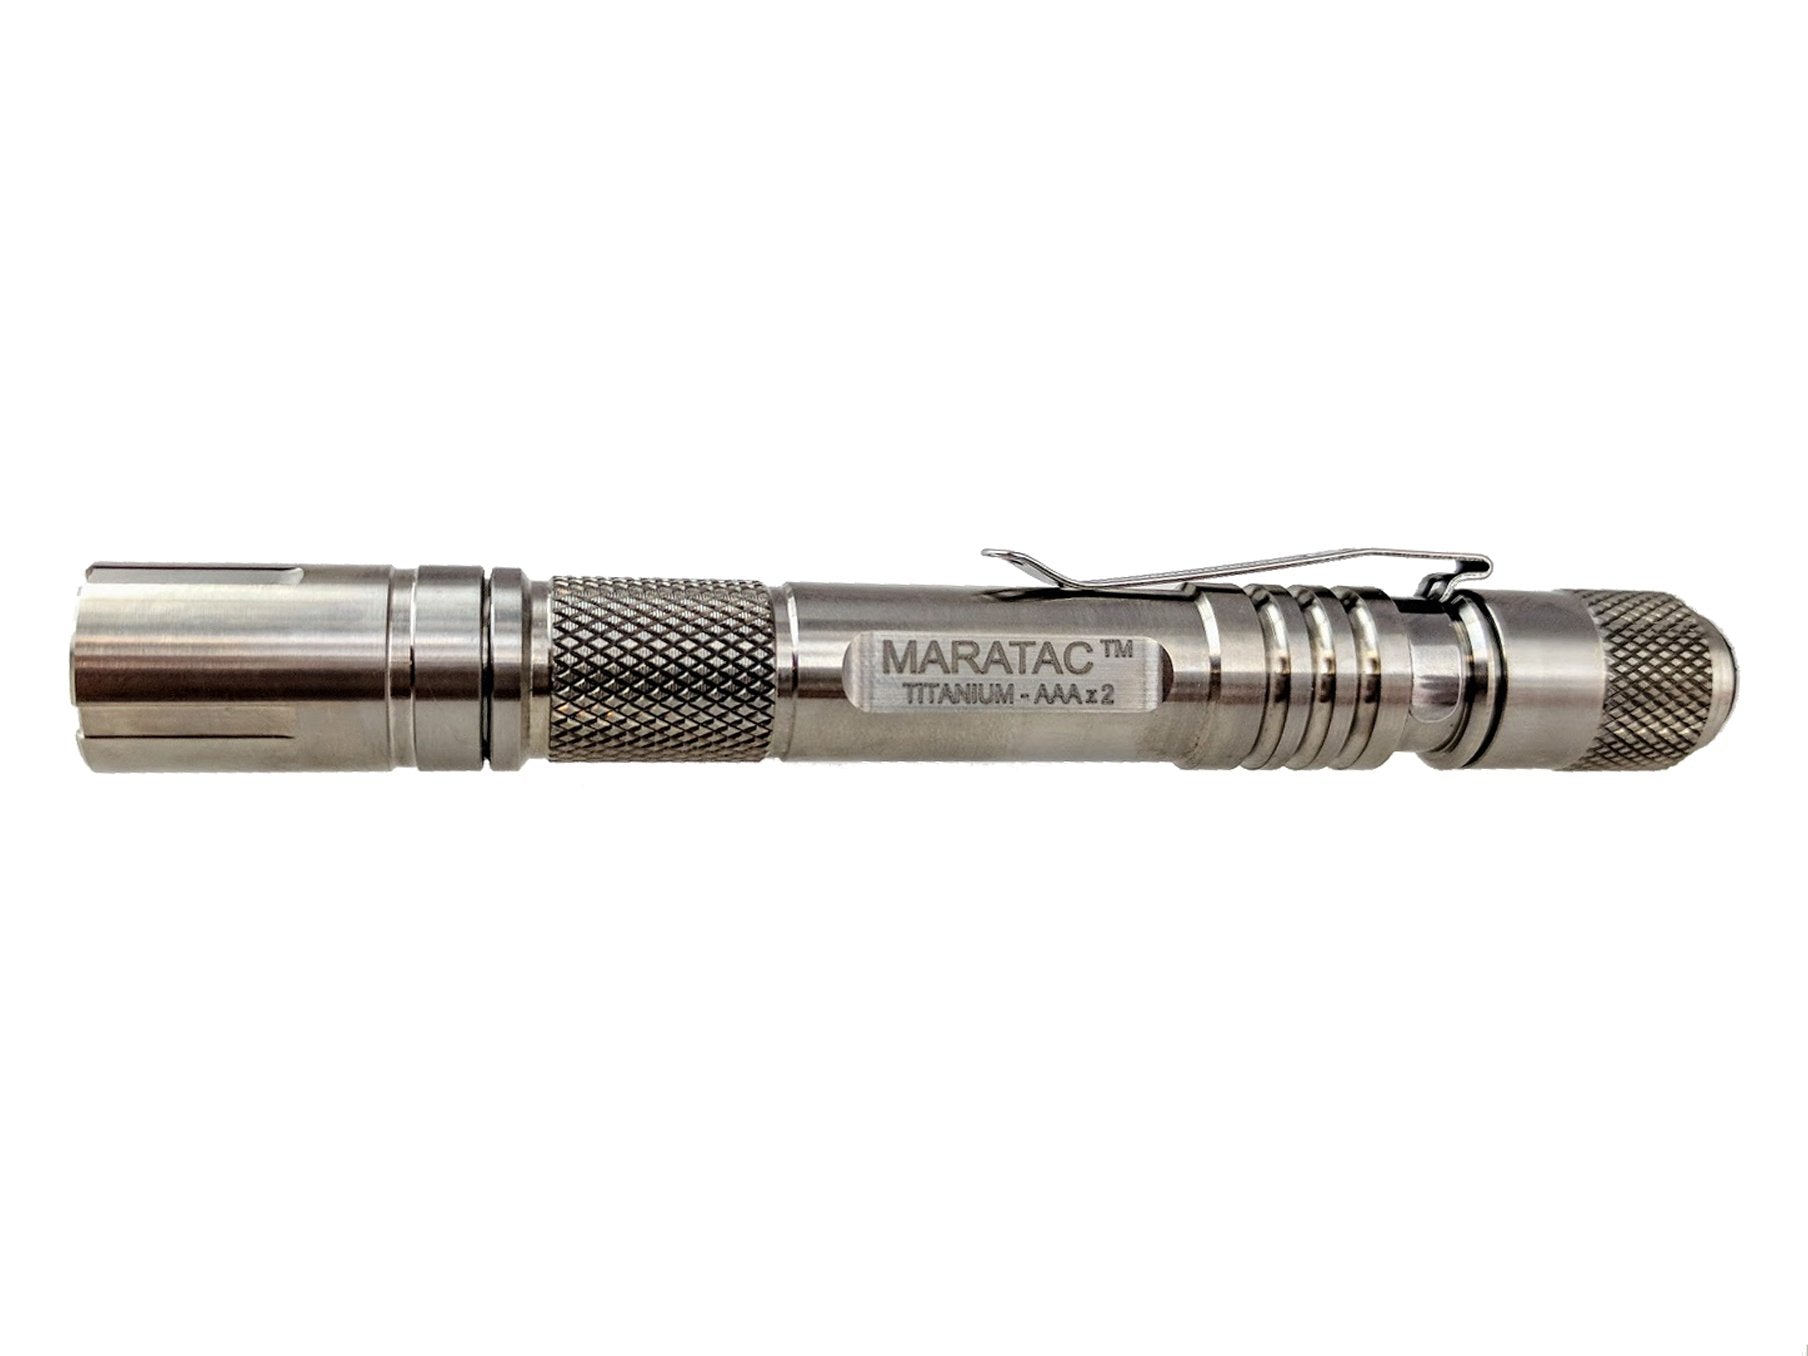 Titanium - Inspection : AAAx2 Extreme - Tactical Light by Maratac Rev 2 - CountyComm